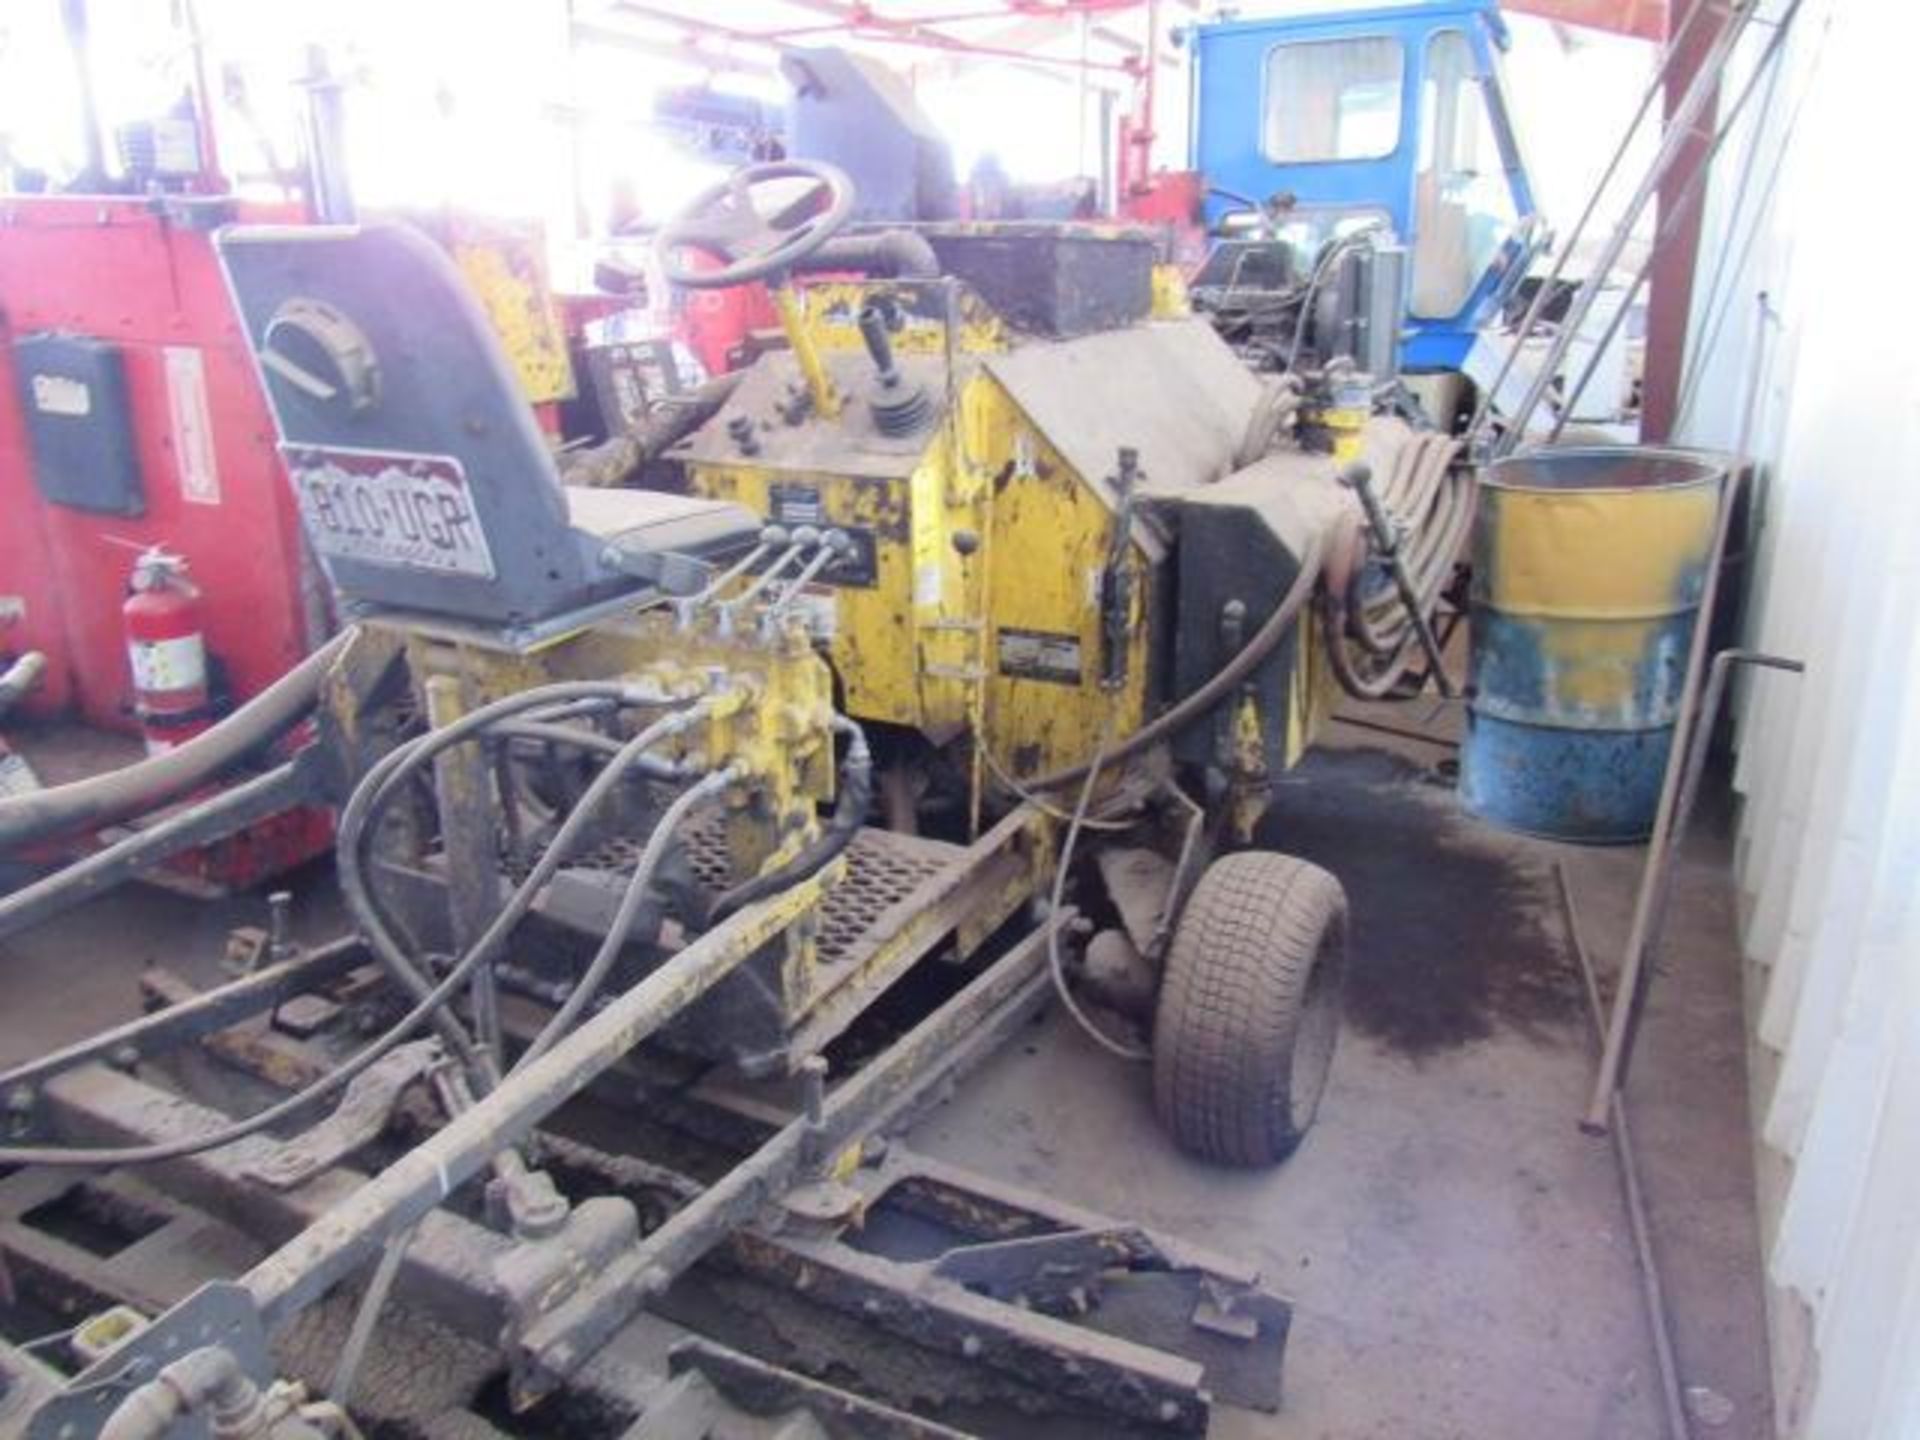 Anders 325RODA Sealcoat Applicator, S/N 325R0DA1505101258, 327 Hours Indicated, LOCATION: 7770 Vent